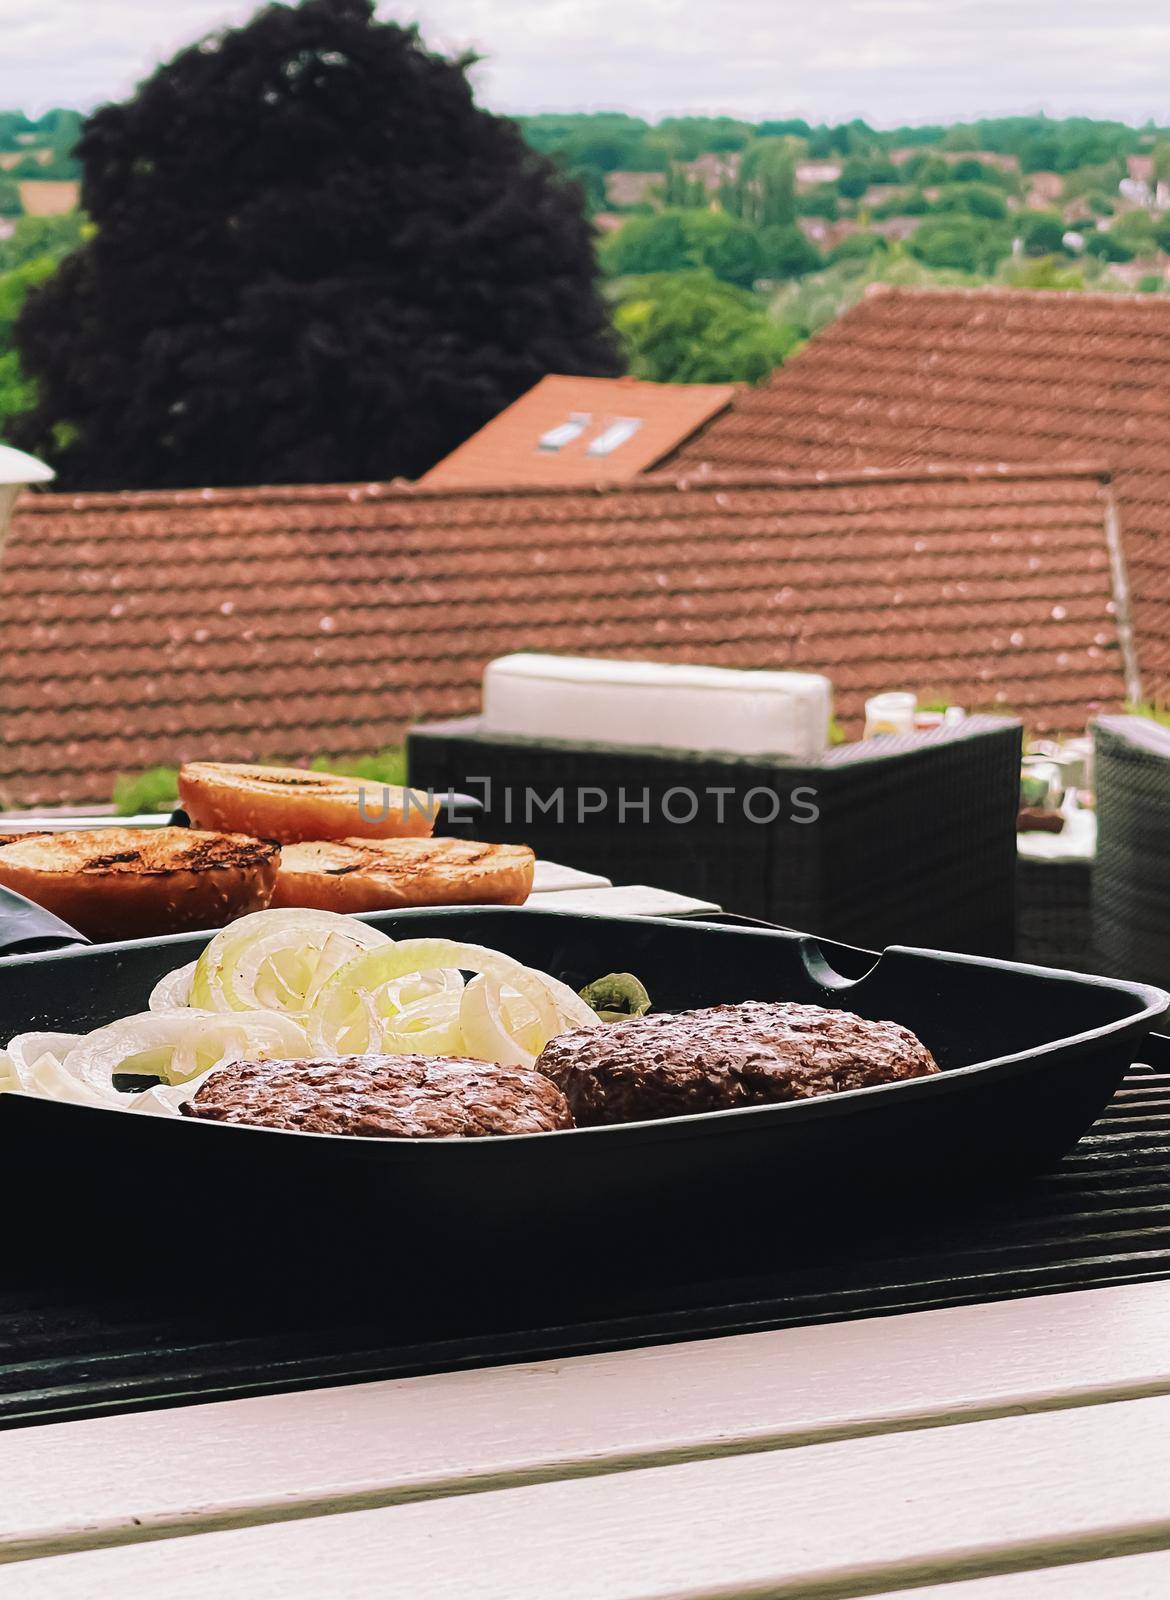 Cooking minced beef burger on cast iron grill skillet outdoors, red meat on frying pan, grilling food in the garden, English countryside living by Anneleven